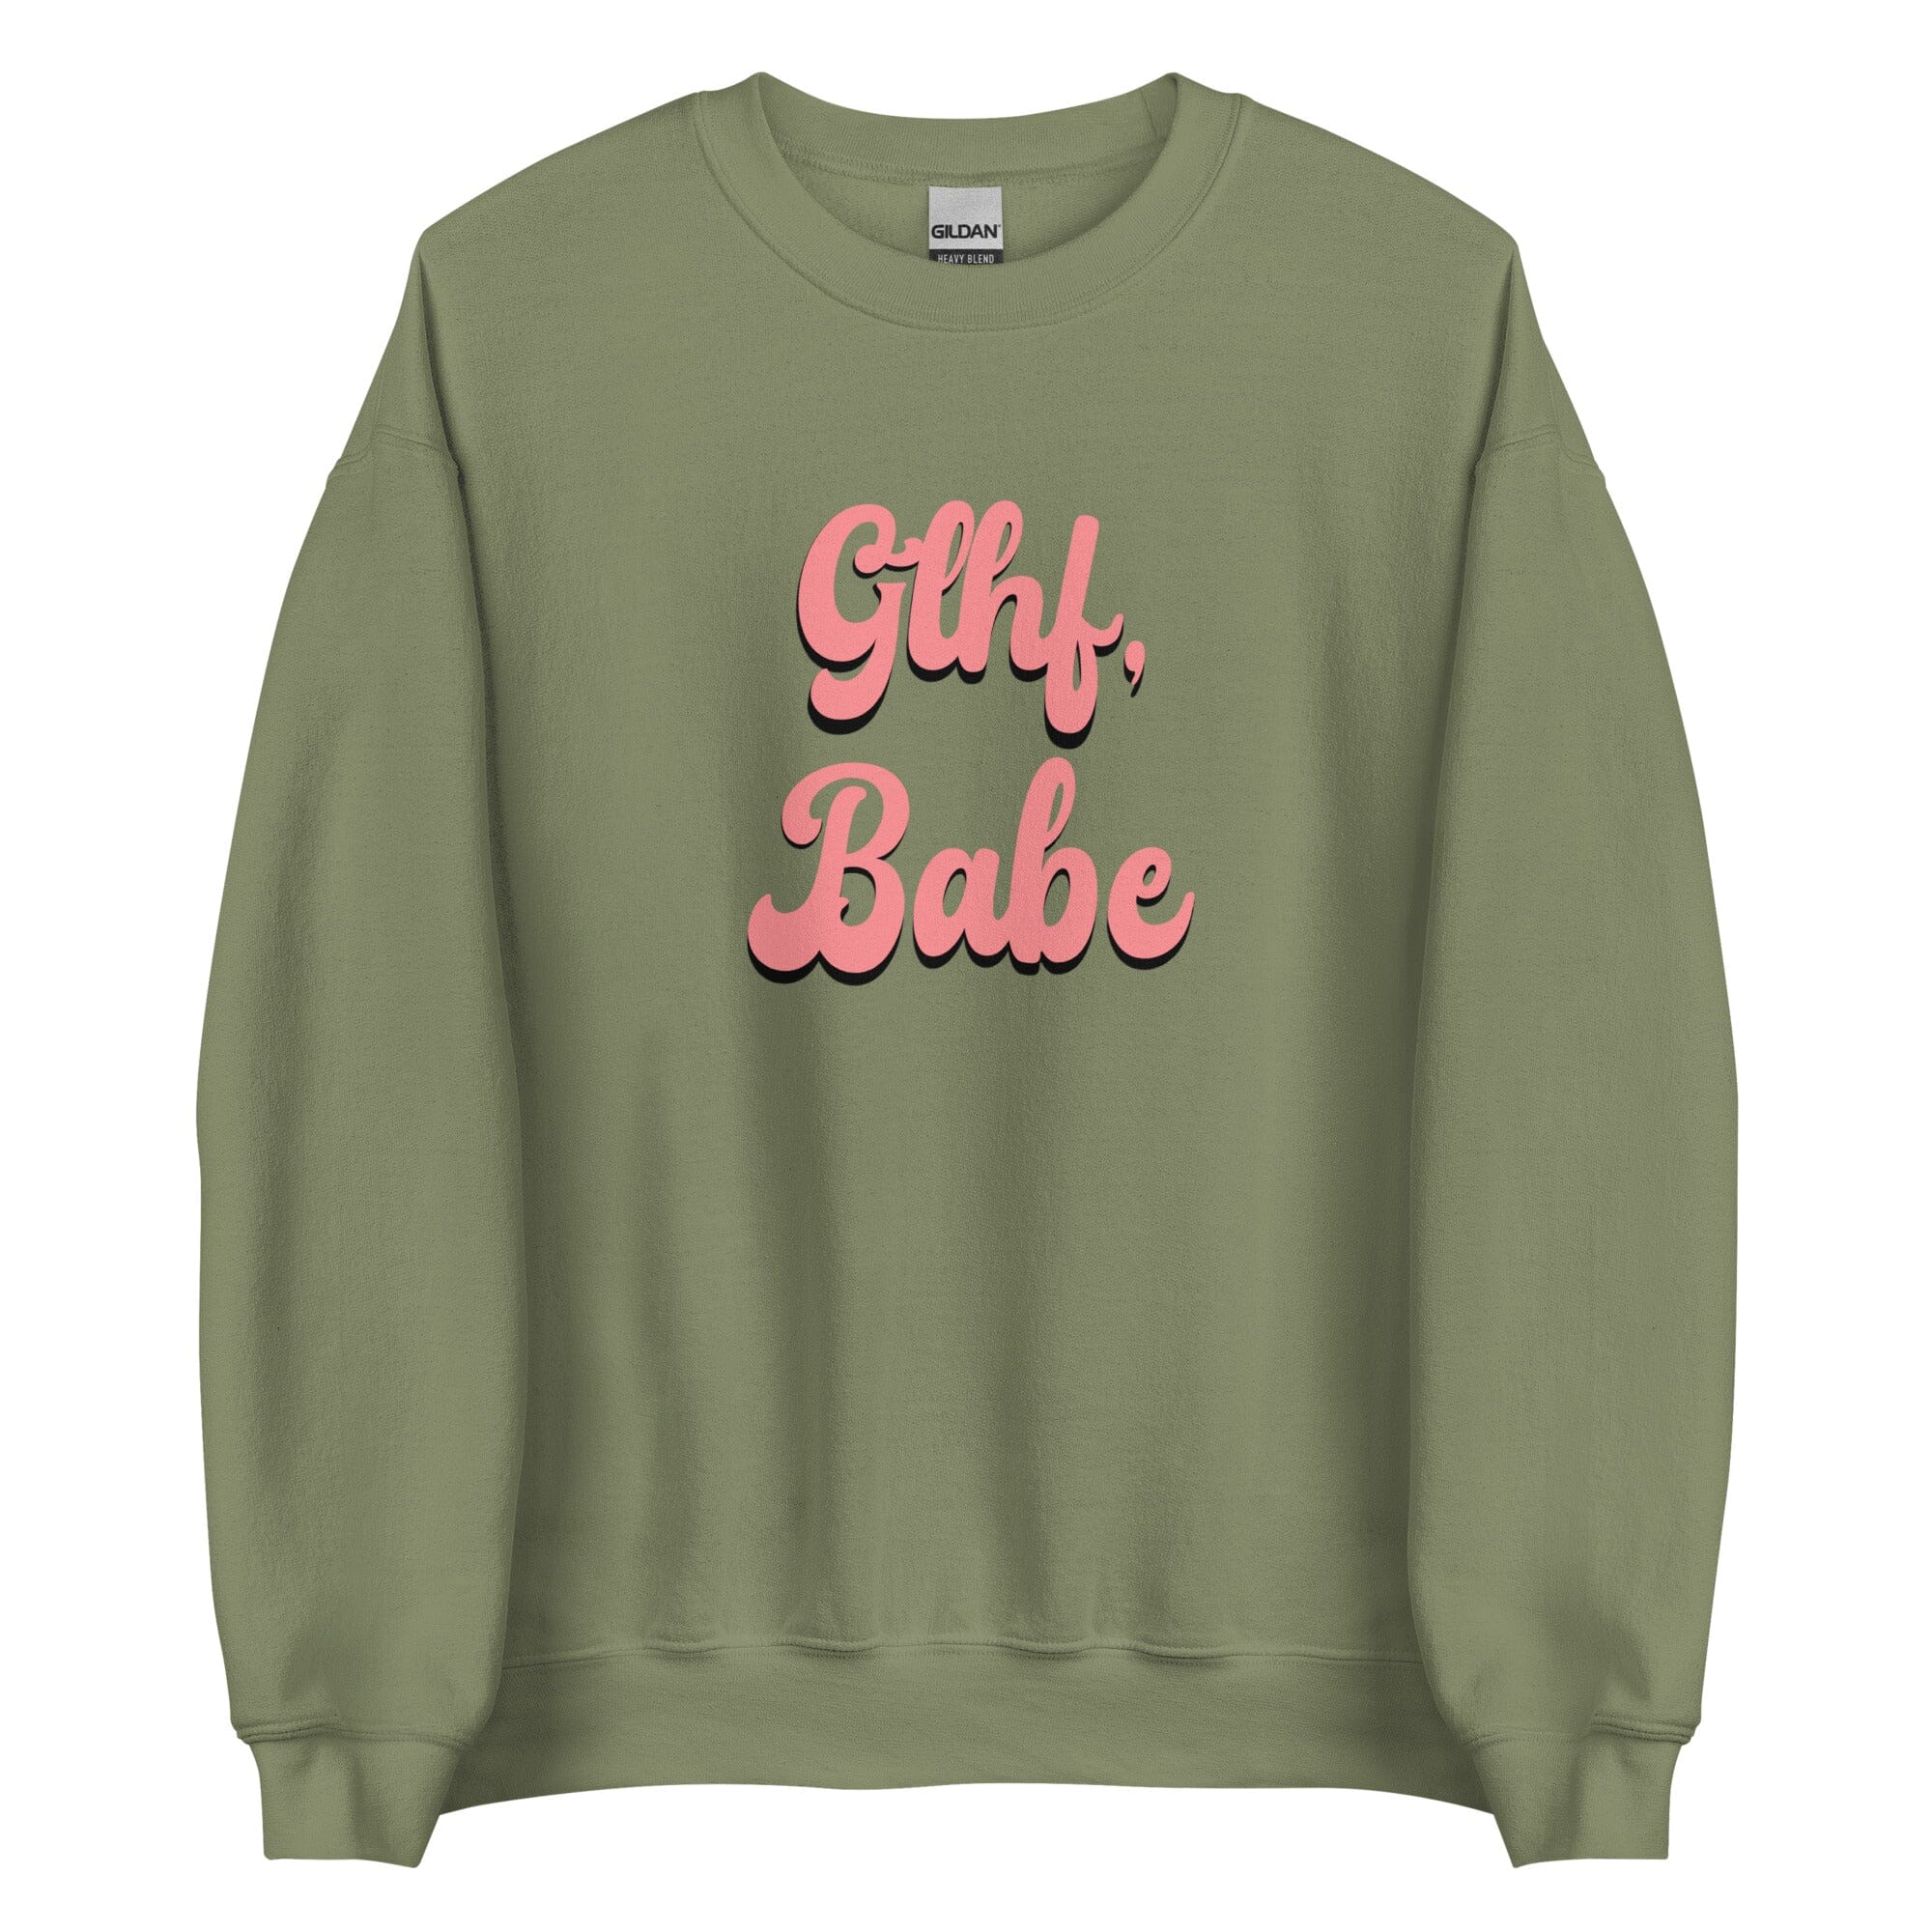 GLHF, Babe | Unisex Sweatshirt | Gamer Affirmations Threads & Thistles Inventory Military Green S 